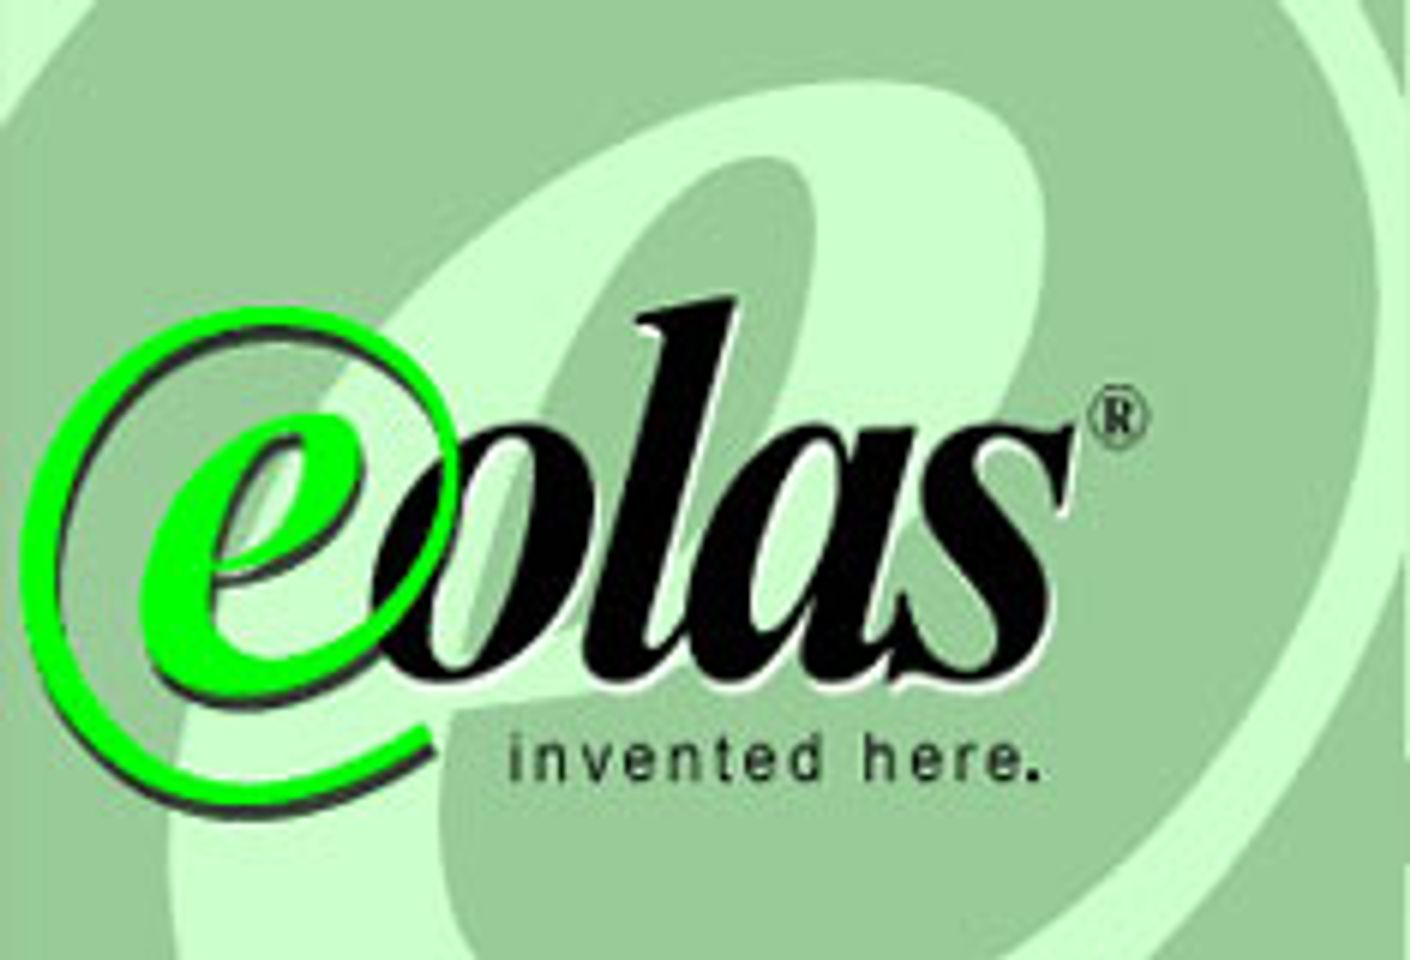 Patent Office Wants Eolas Web Patent Reviewed